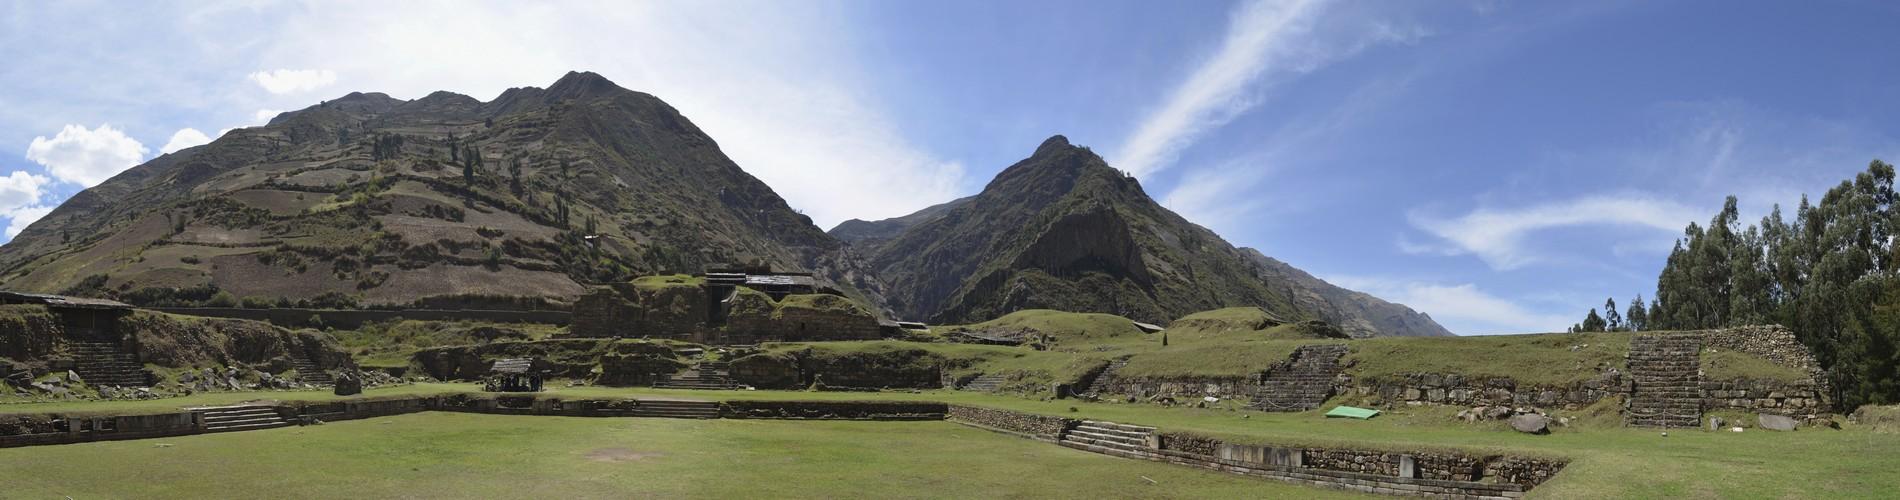 Unearthing Ancient Wonders - Peruvian Archaeologists Rediscover Hidden Secrets